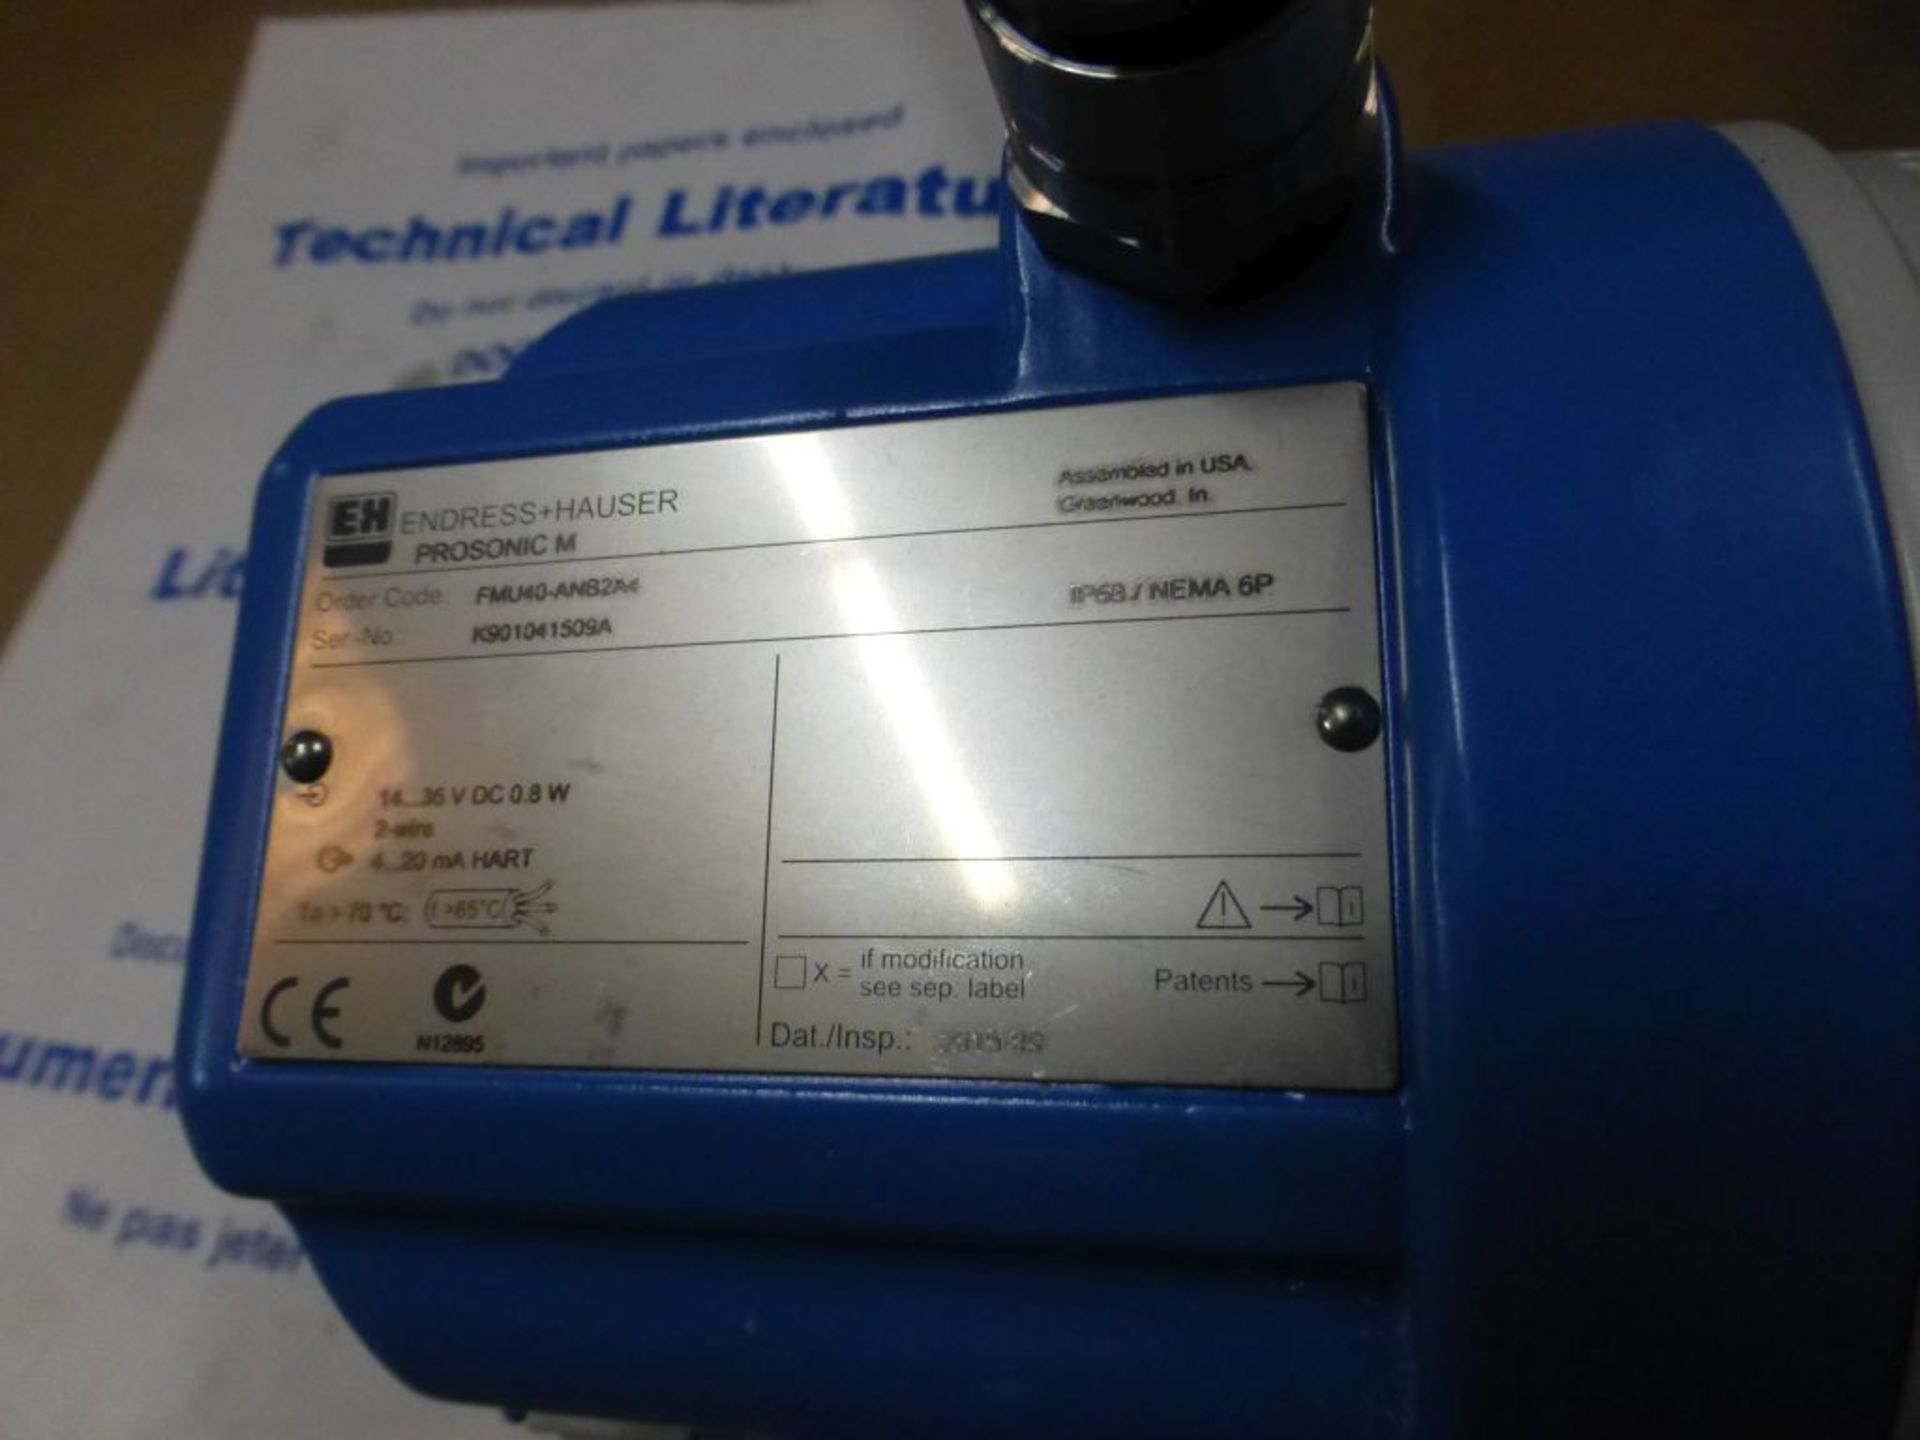 Endress Hauser Prosonic M - Order Code: FMU40-ANB2A4; 2-Wire; 36 VDC; .8W; New Surplus; Tag: 221988 - Image 3 of 4